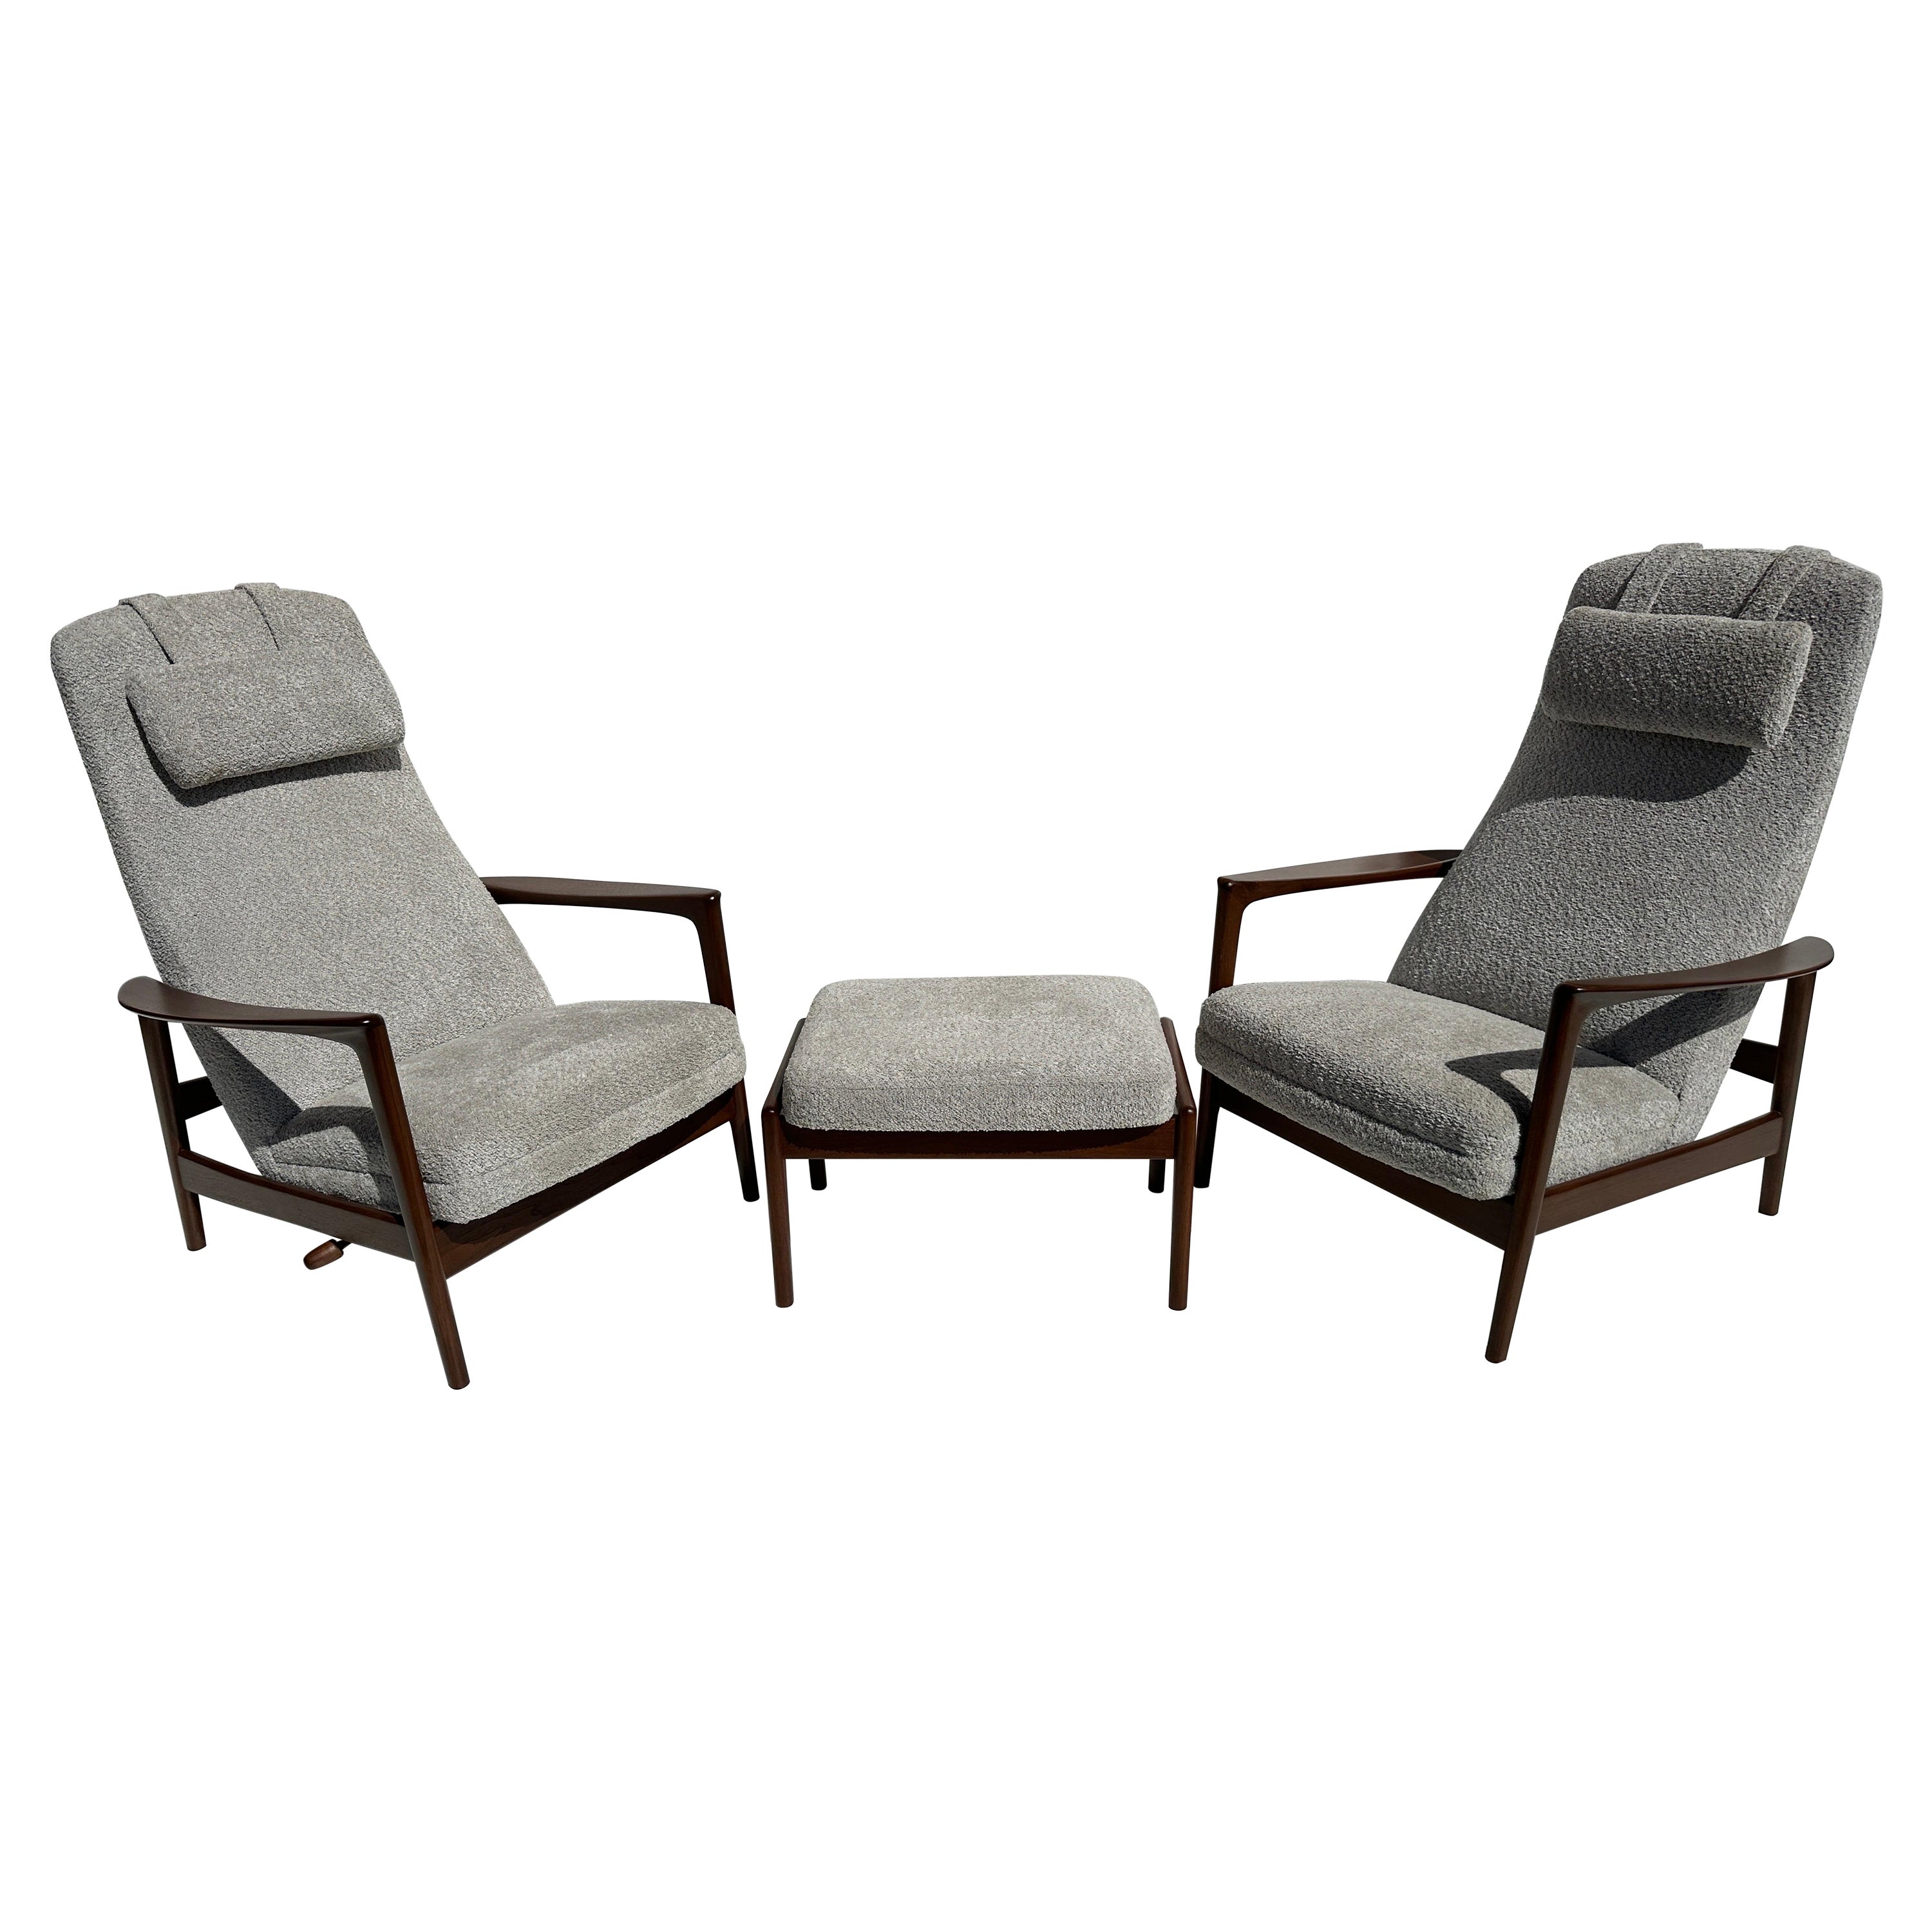 Set of Folke Ohlsson Reclining Lounge Chairs For Sale